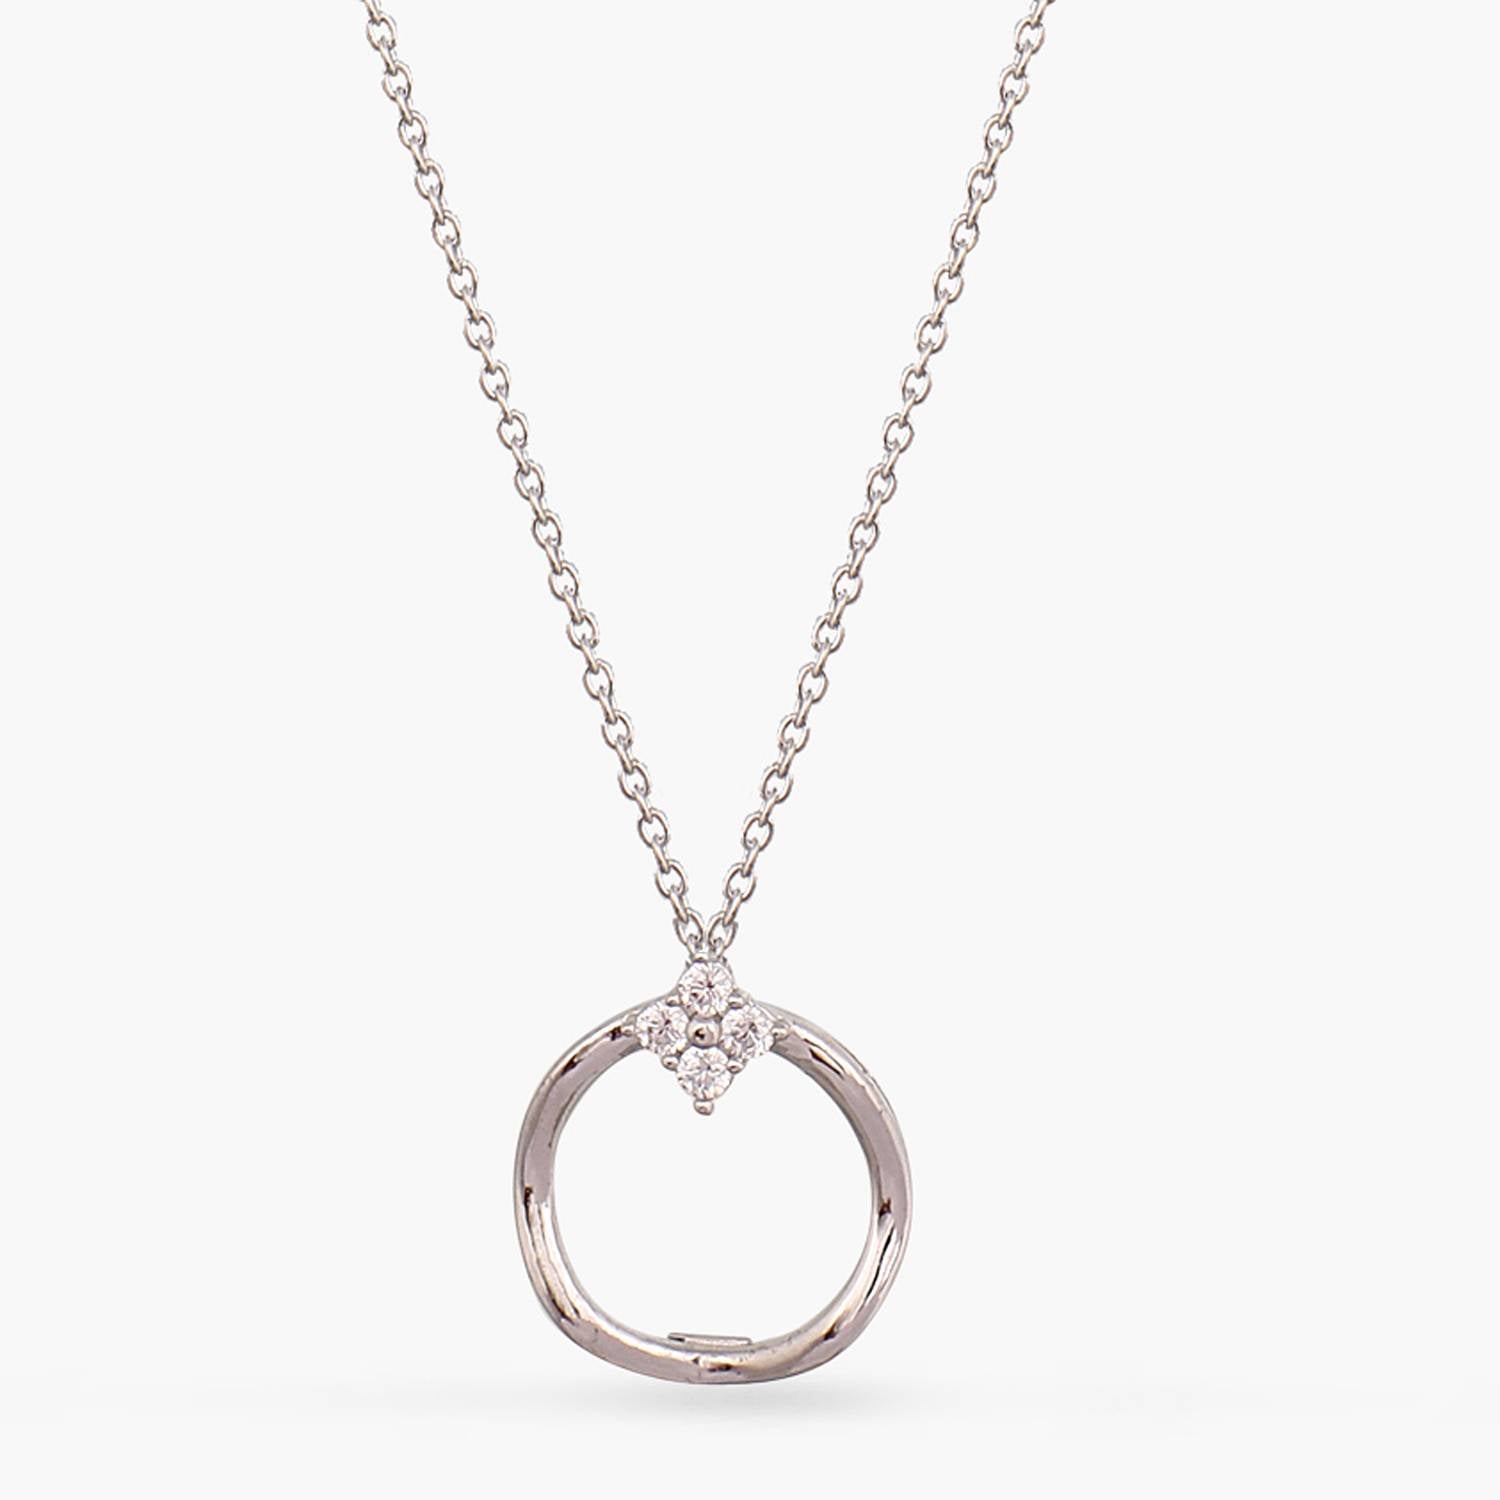 Discover Ring Charm Delicate Silver Pendant Necklace